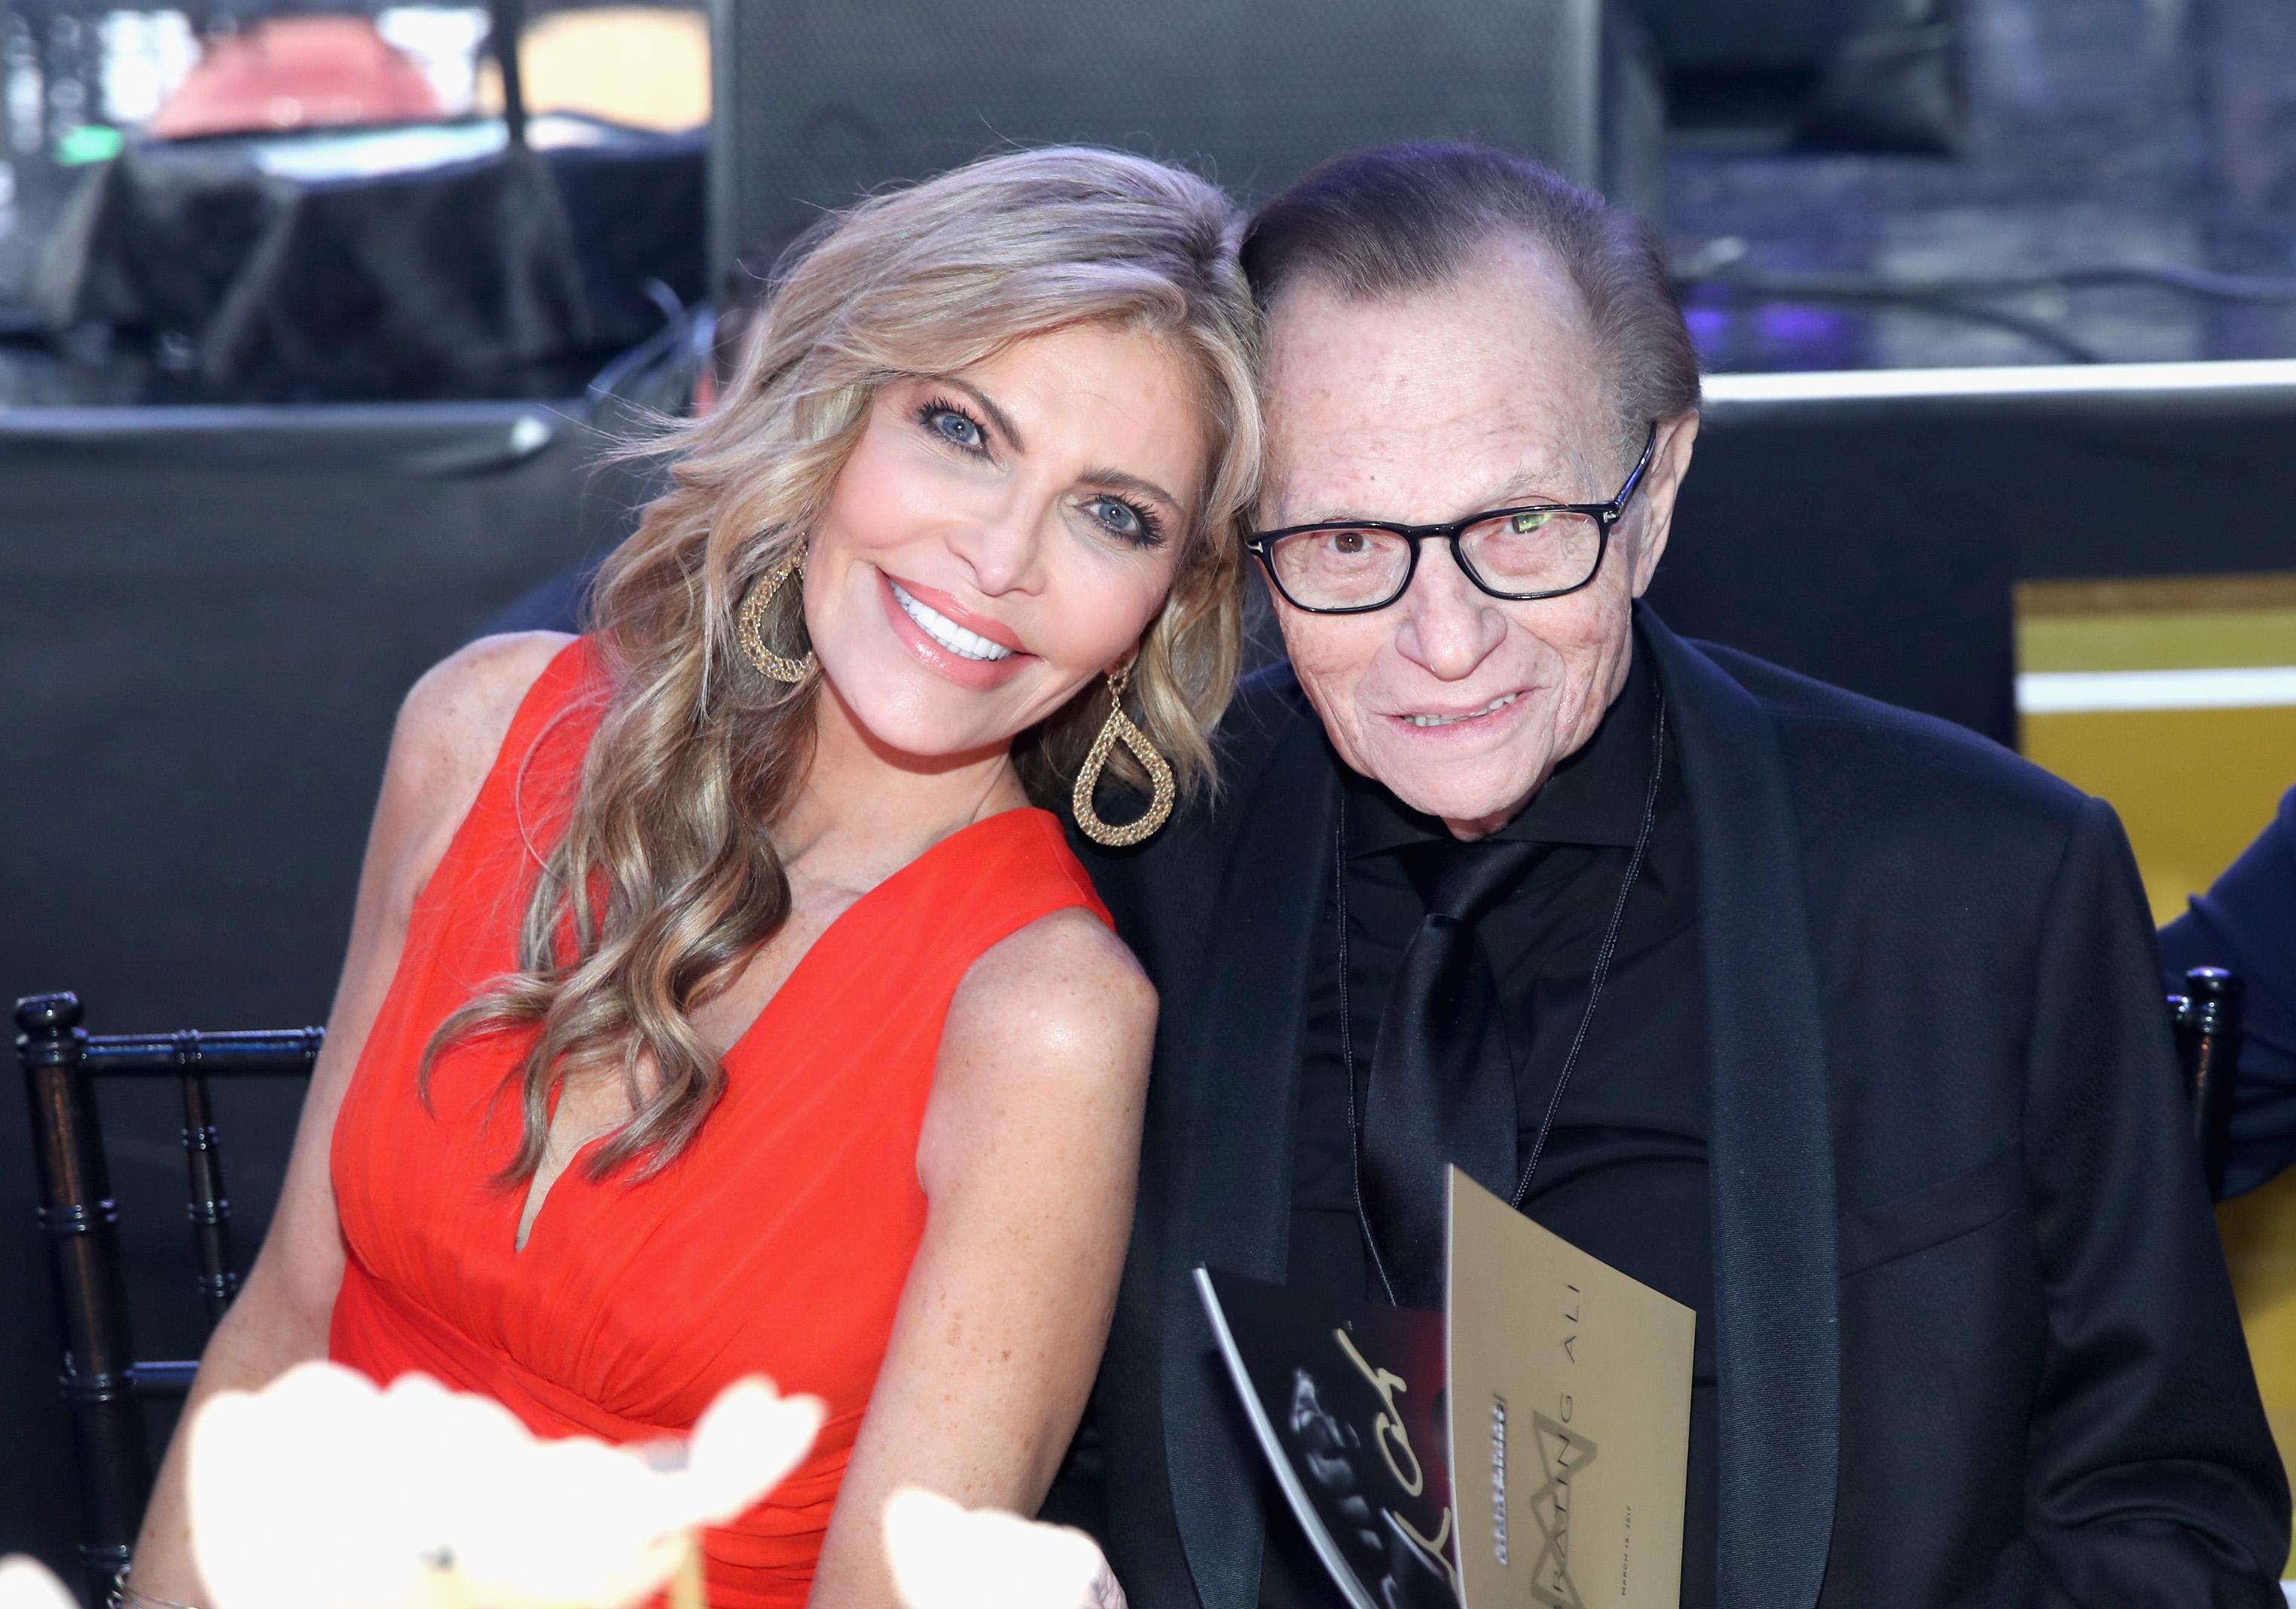 Shawn King (L) and television personality Larry King attend Muhammad Ali's Celebrity Fight Night XXIII at the JW Marriott Desert Ridge Resort & Spa on March 18, 2017 in Phoenix, Arizona | Source: Getty Images